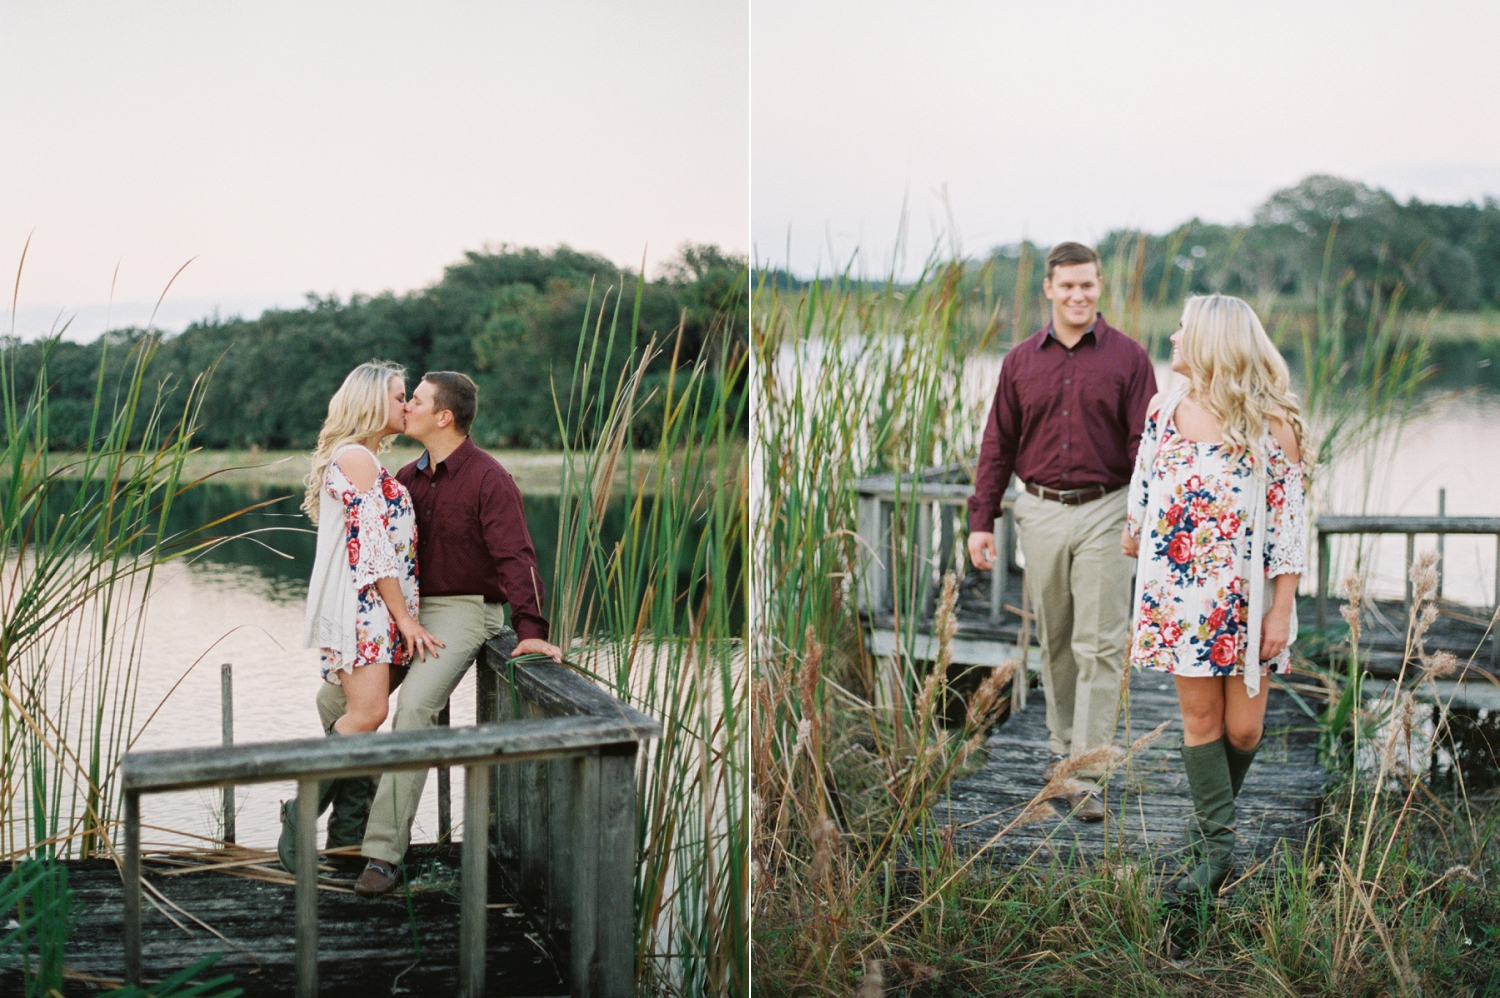 engagement session outfit ideas - engagement outfit inspiration - fall engagement session